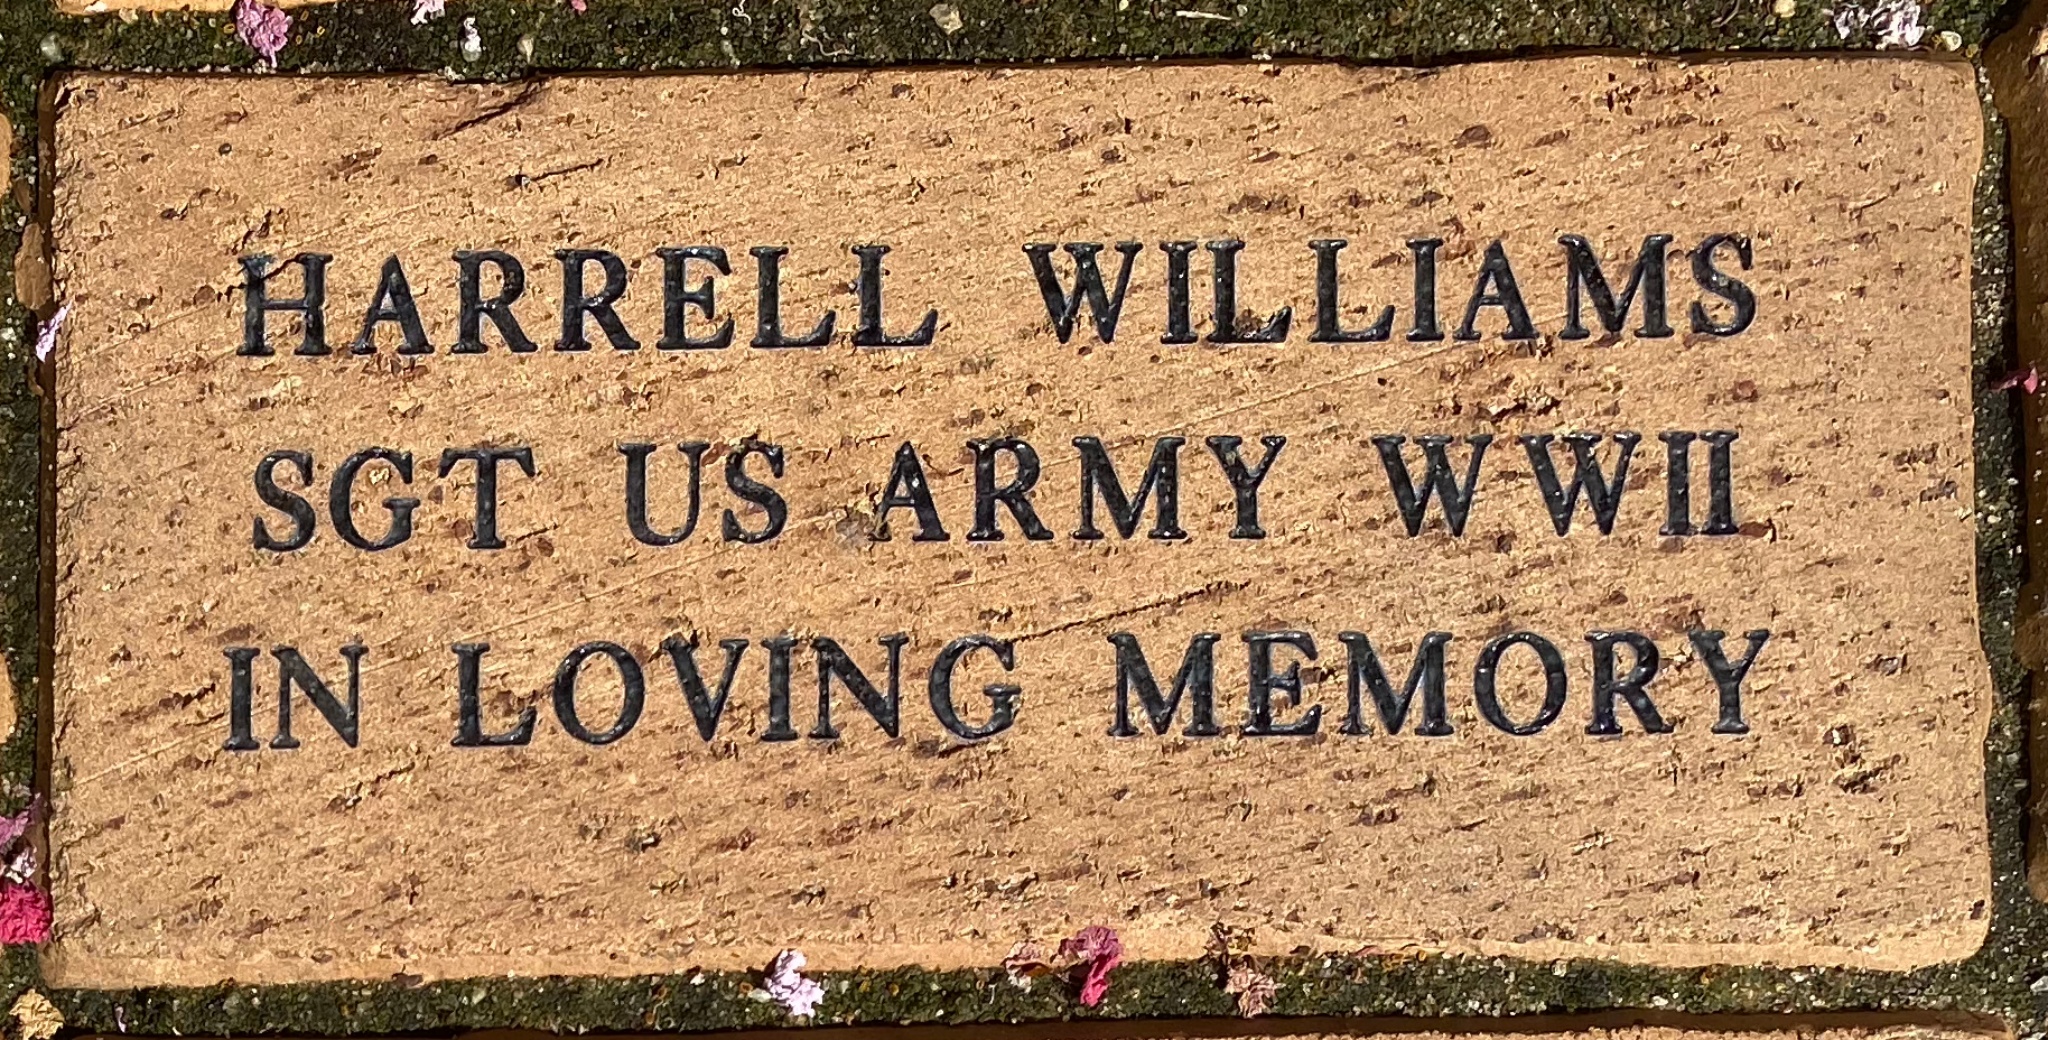 HARRELL WILLIAMS SGT US ARMY WWII IN LOVING MEMORY